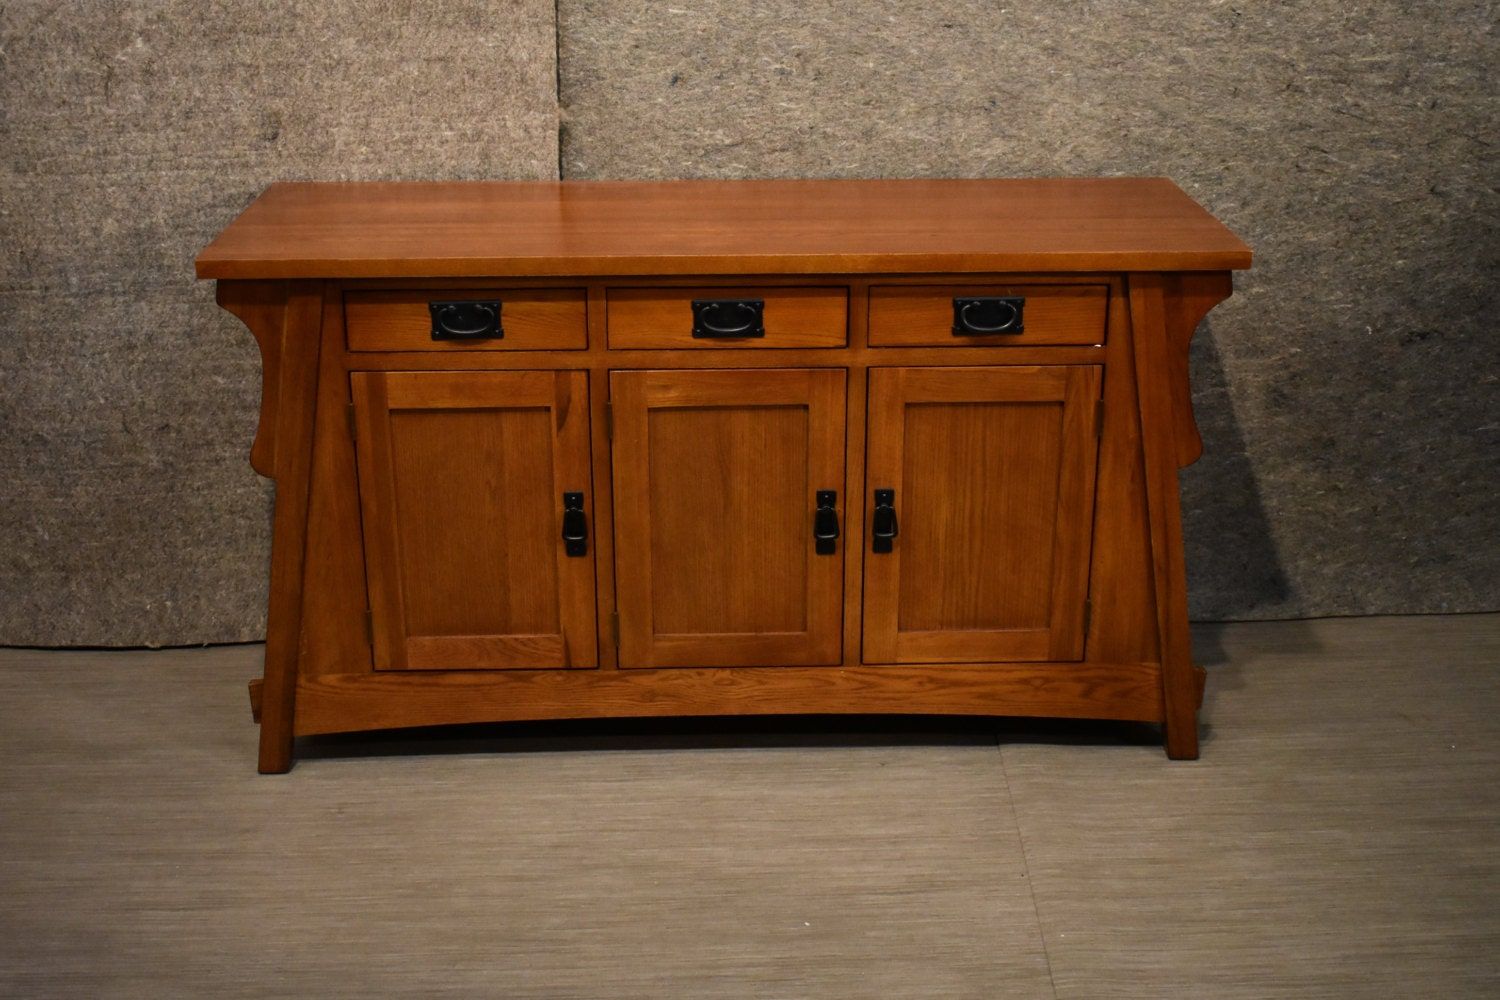 Crofter Style Mission Solid Oak Console Sideboard Sofa Table Intended For Metal And Mission Oak Console Tables (View 7 of 20)